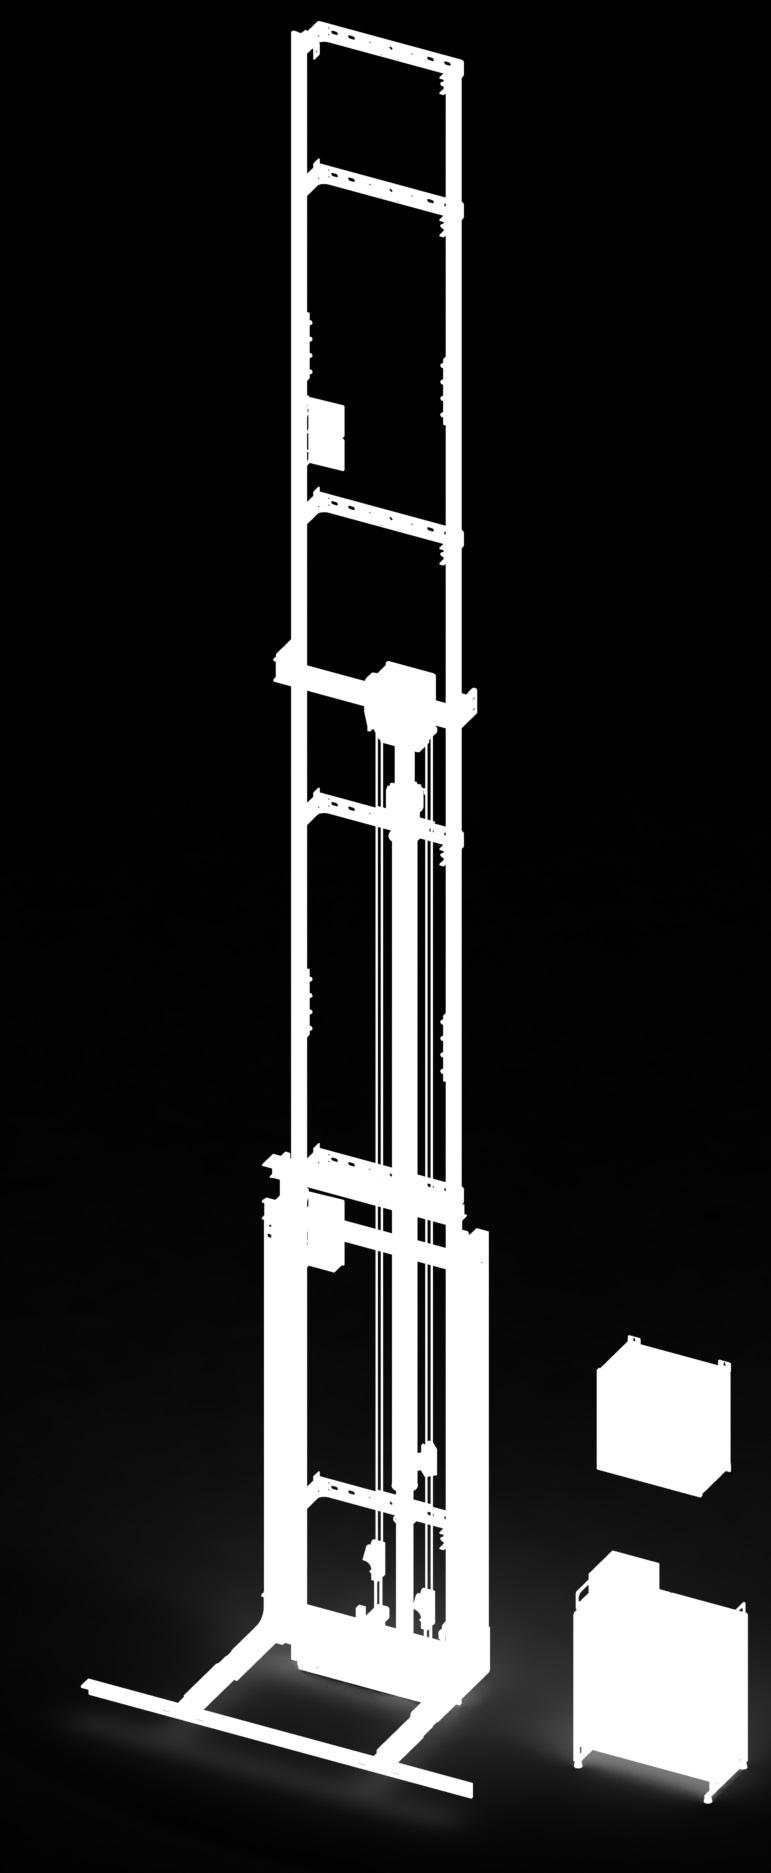 With more standard features and custom options than any other elevator on the market today, Symmetry s Hydraulic Drive Residential Elevator system is the industry leader.